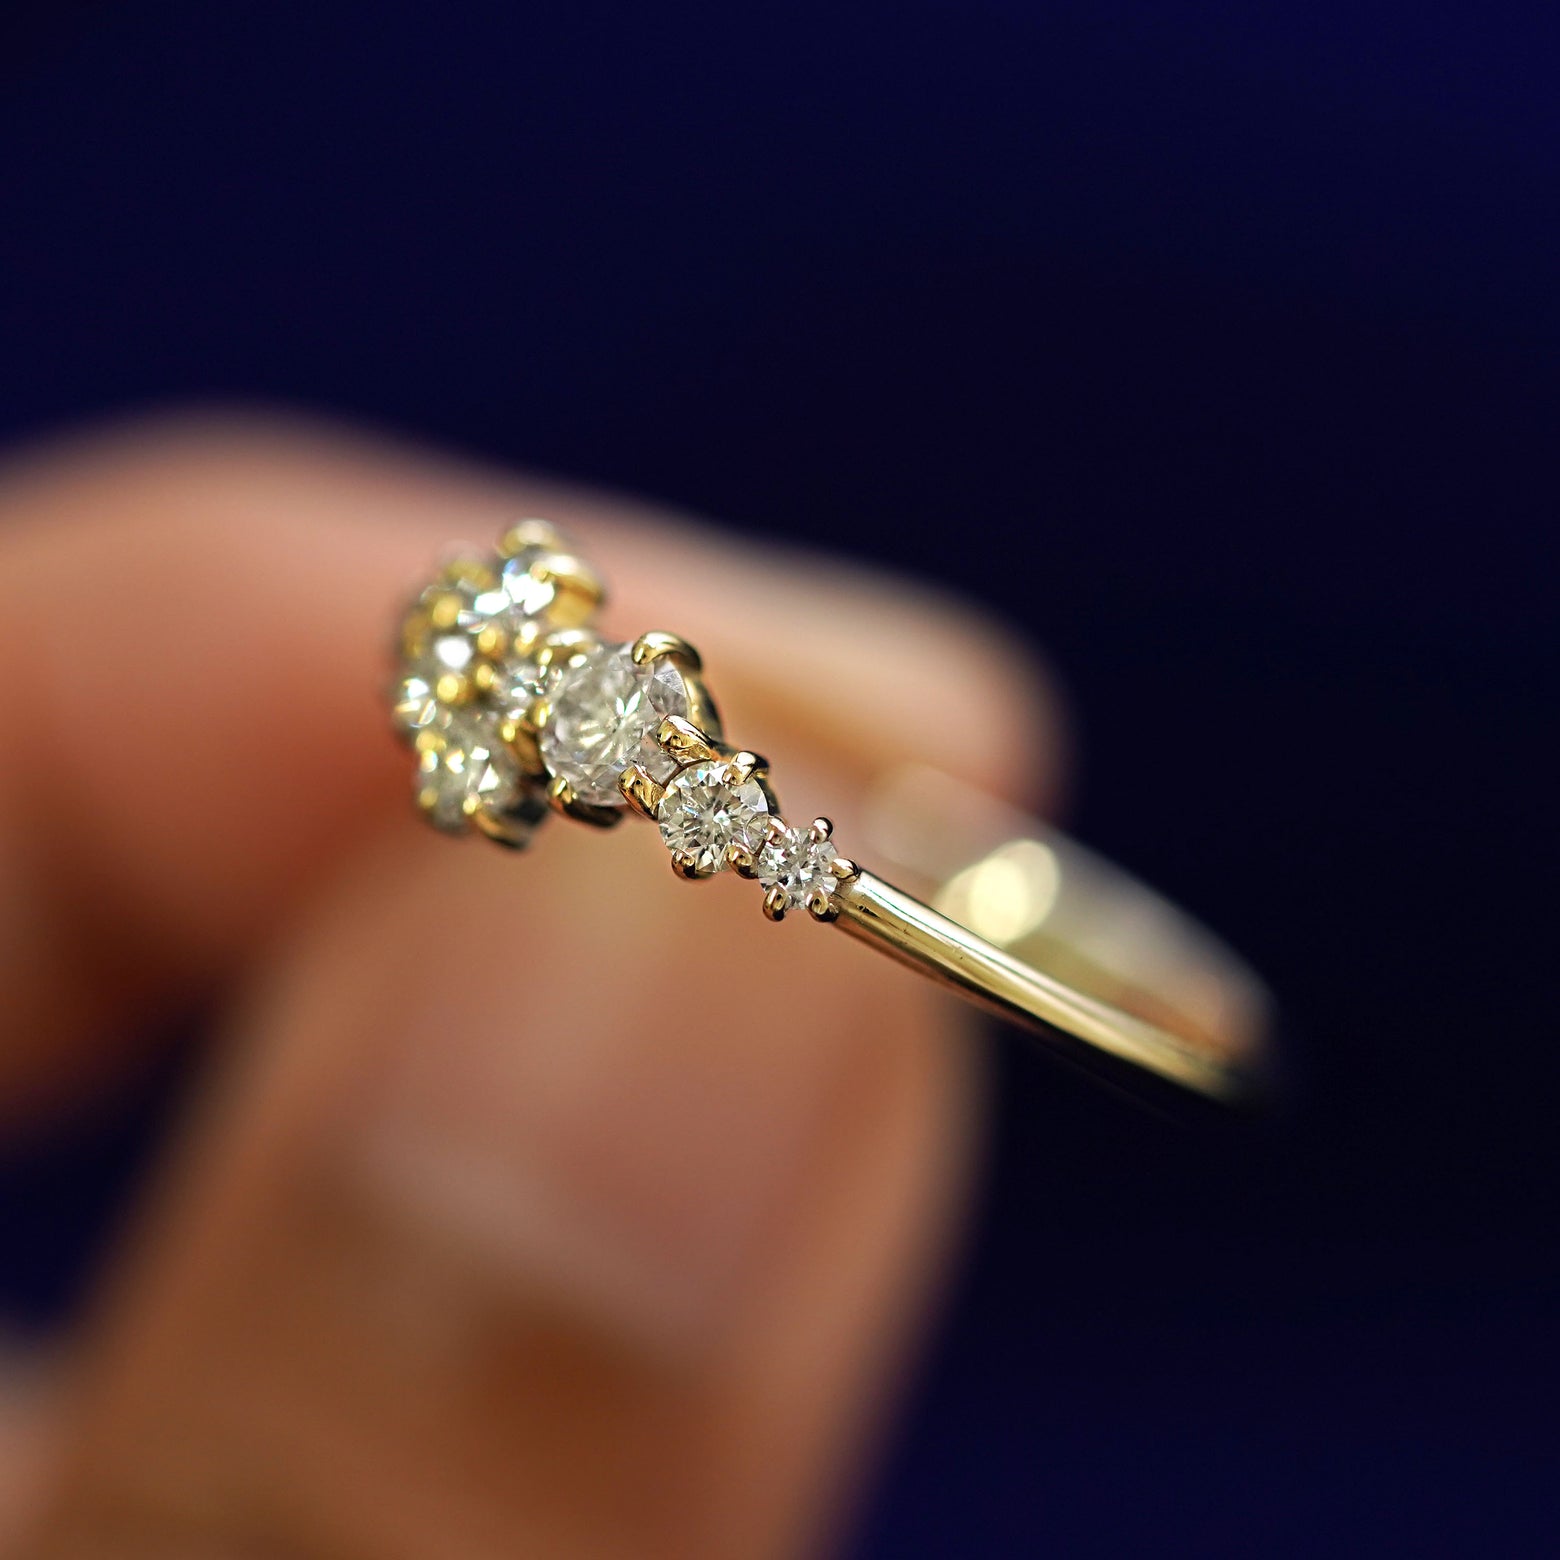 A model holding a Diamond Cluster Ring tilted to show the side of the ring